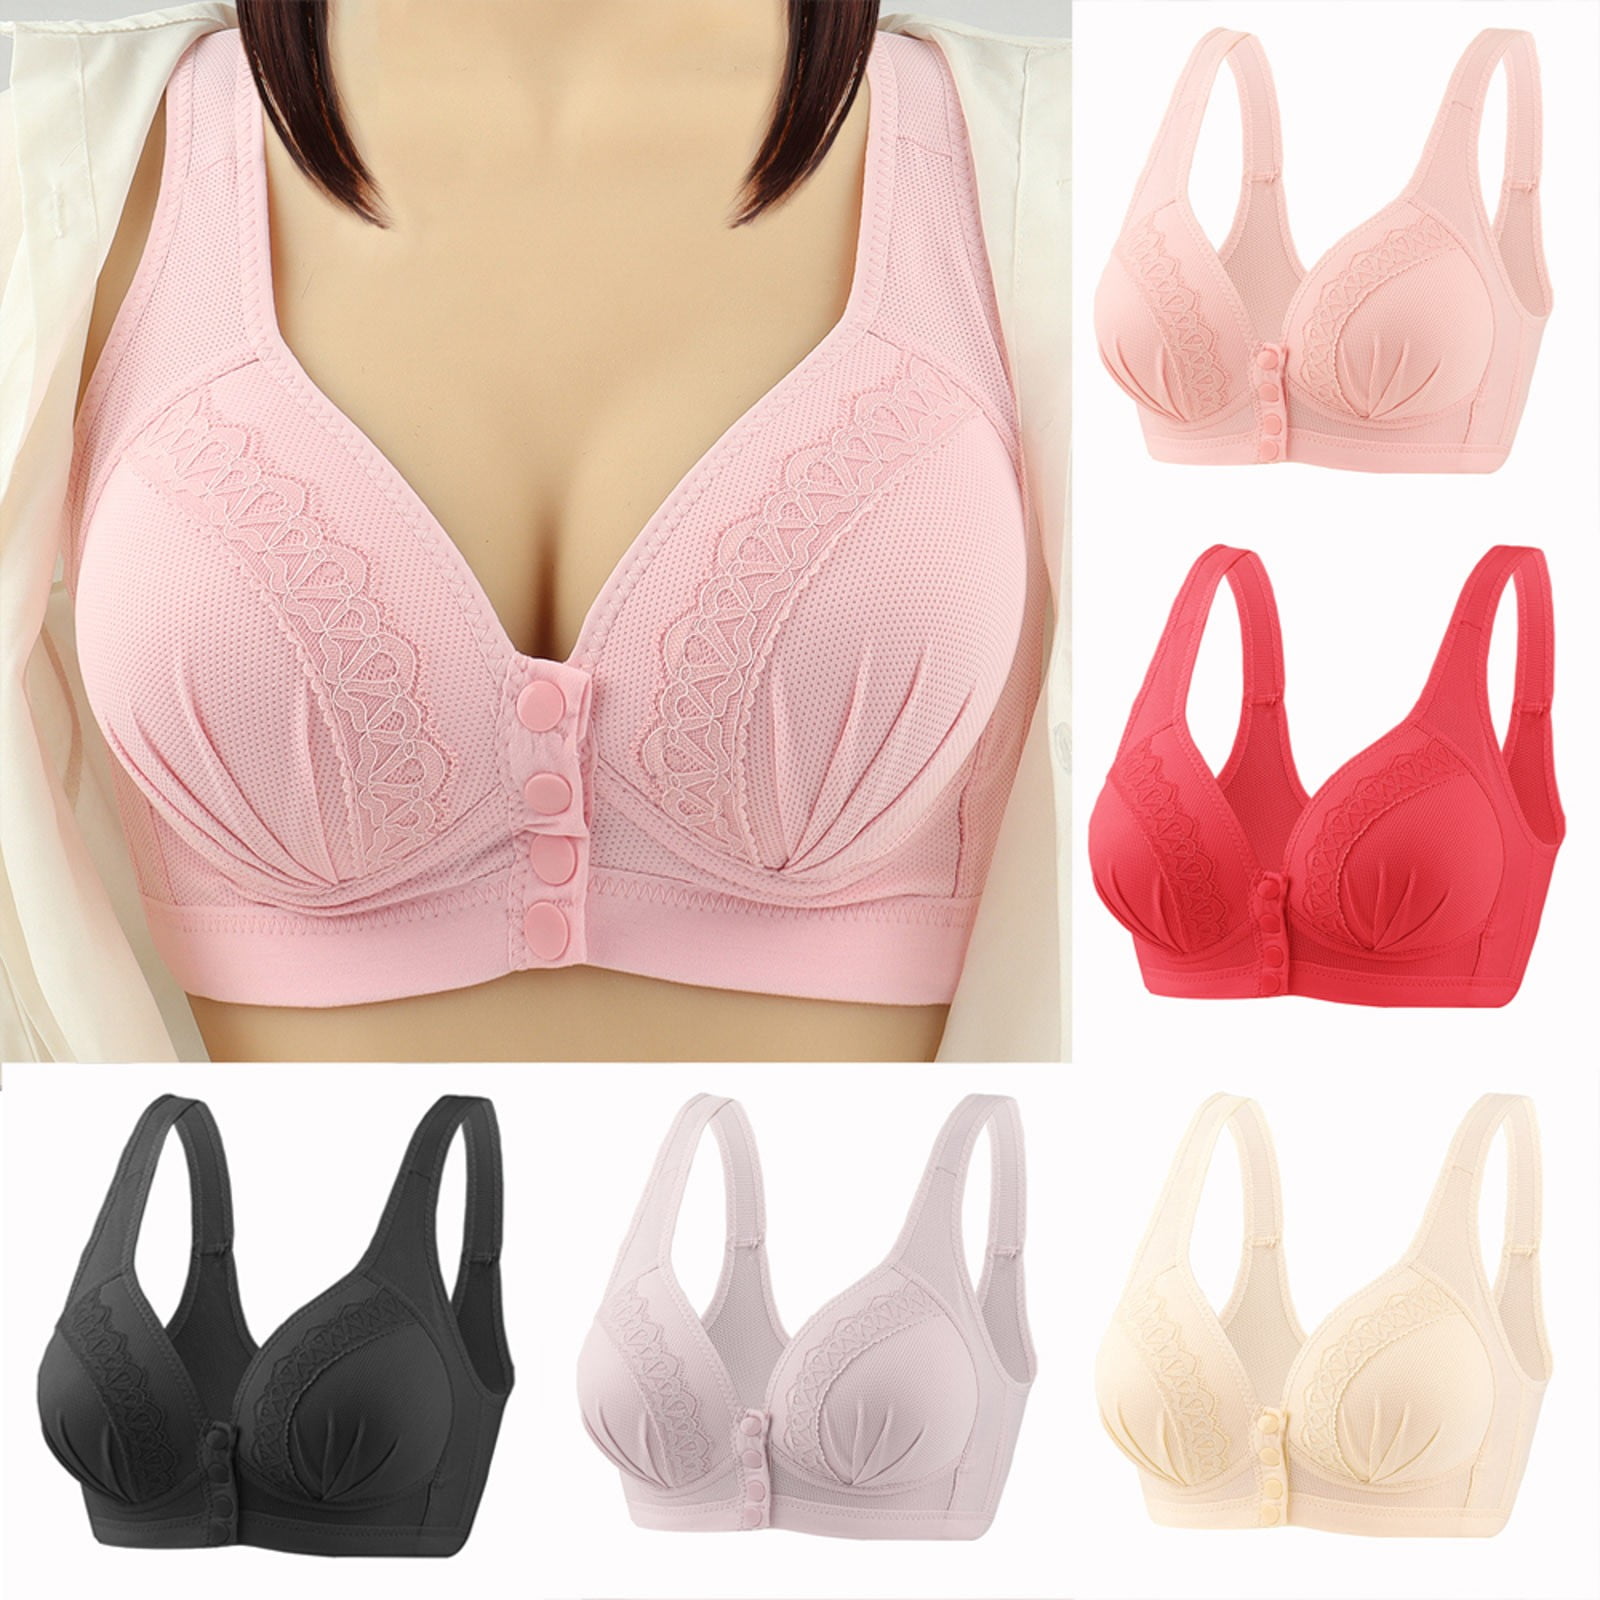 CAICJ98 Lingerie for Women Compression Wirefree High Support Bra